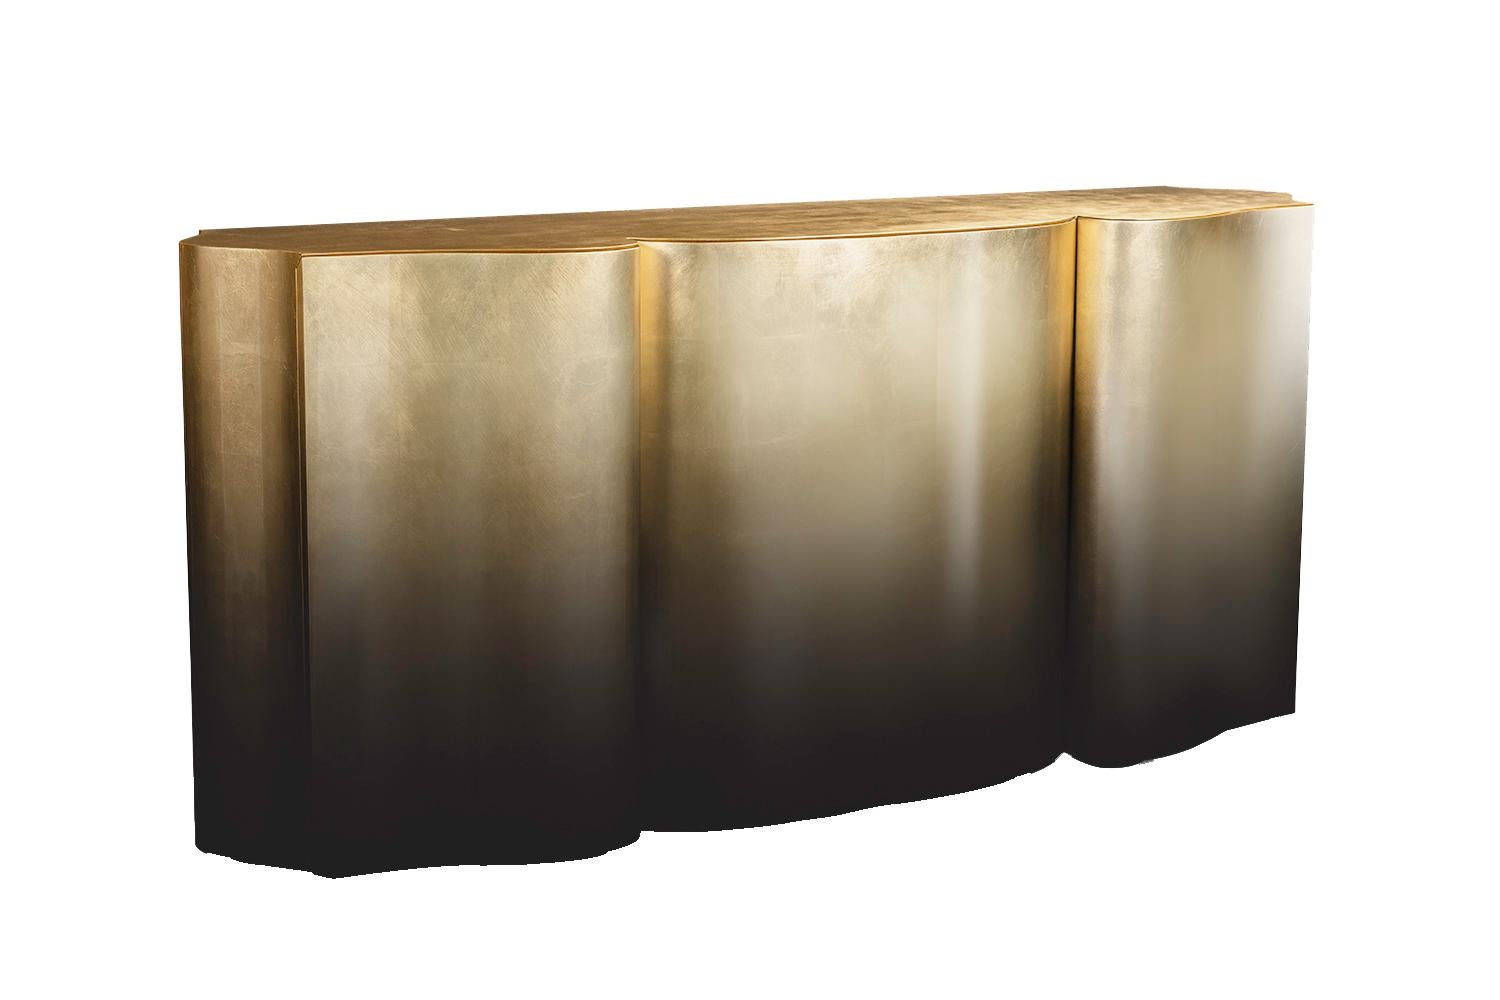 Honor Gradient Sideboard by Memoir Essence
Dimensions: D 50 x W 200 x H 90 cm.
Materials: Gold leaf, and royal ebony with black gradient.

Also available with a lacquered interior. Please contact us.

This stunning sideboard presents a curvilinear